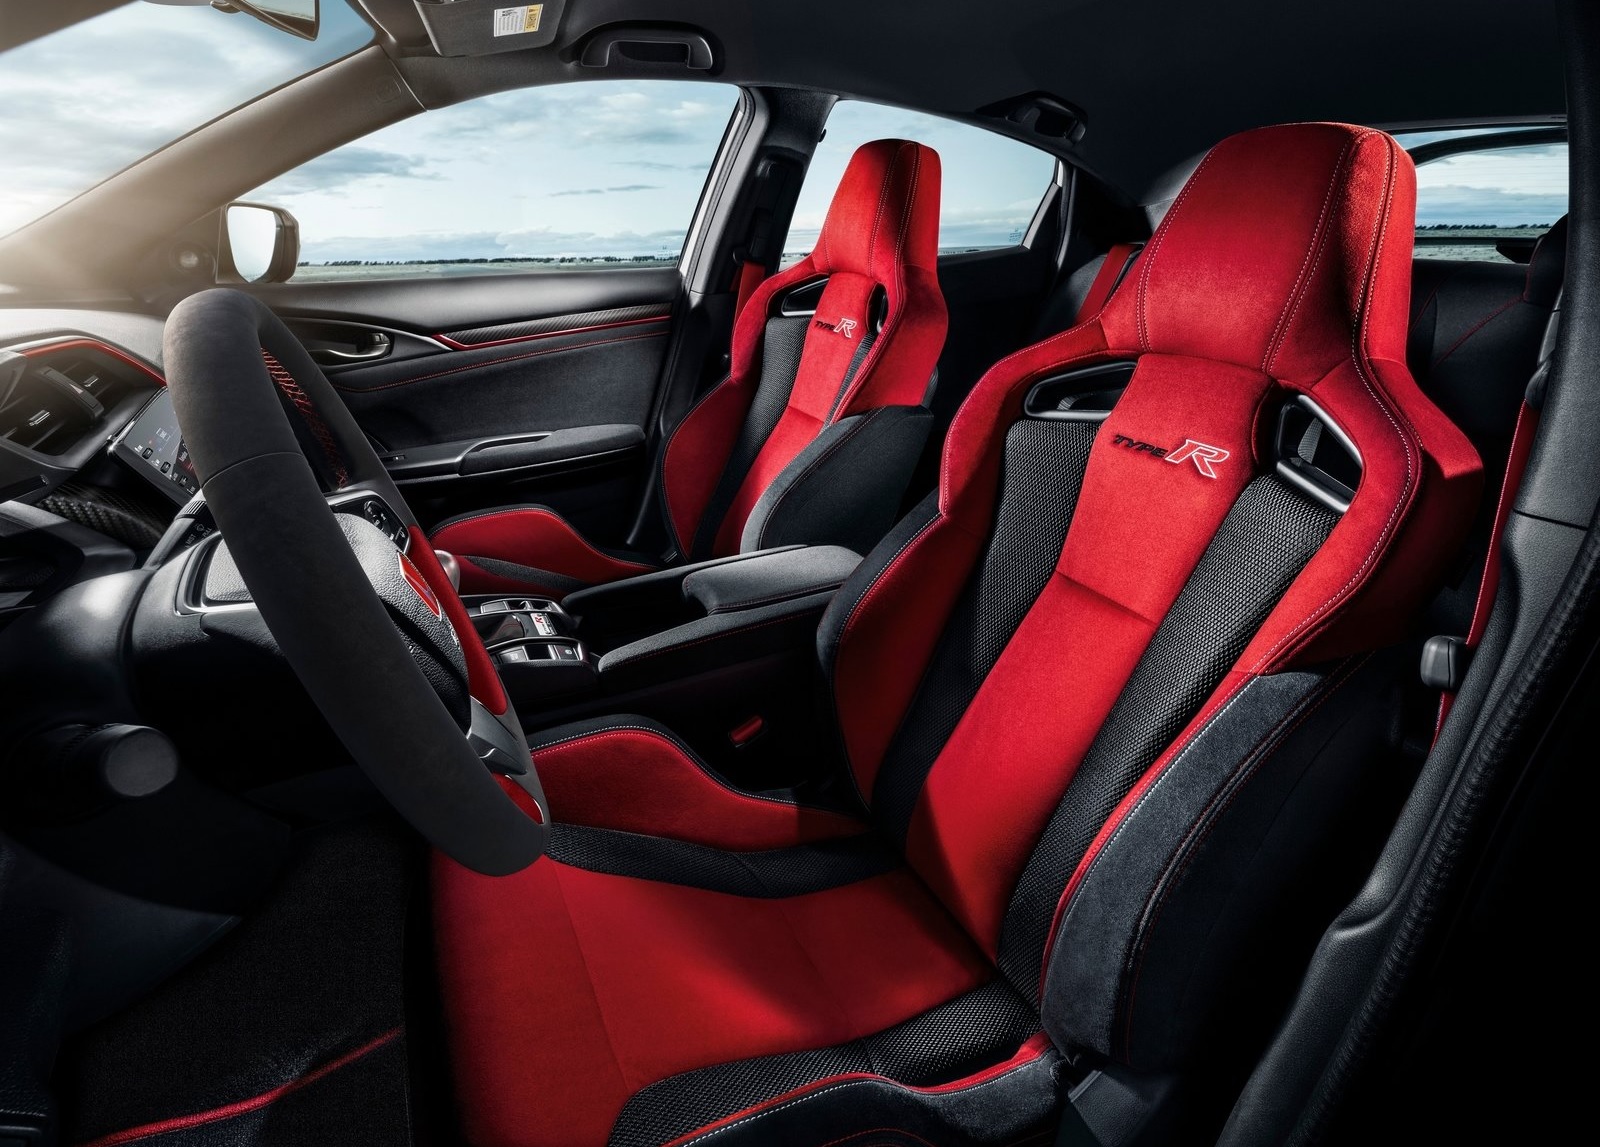 Is the Honda Civic Type R Automatic?